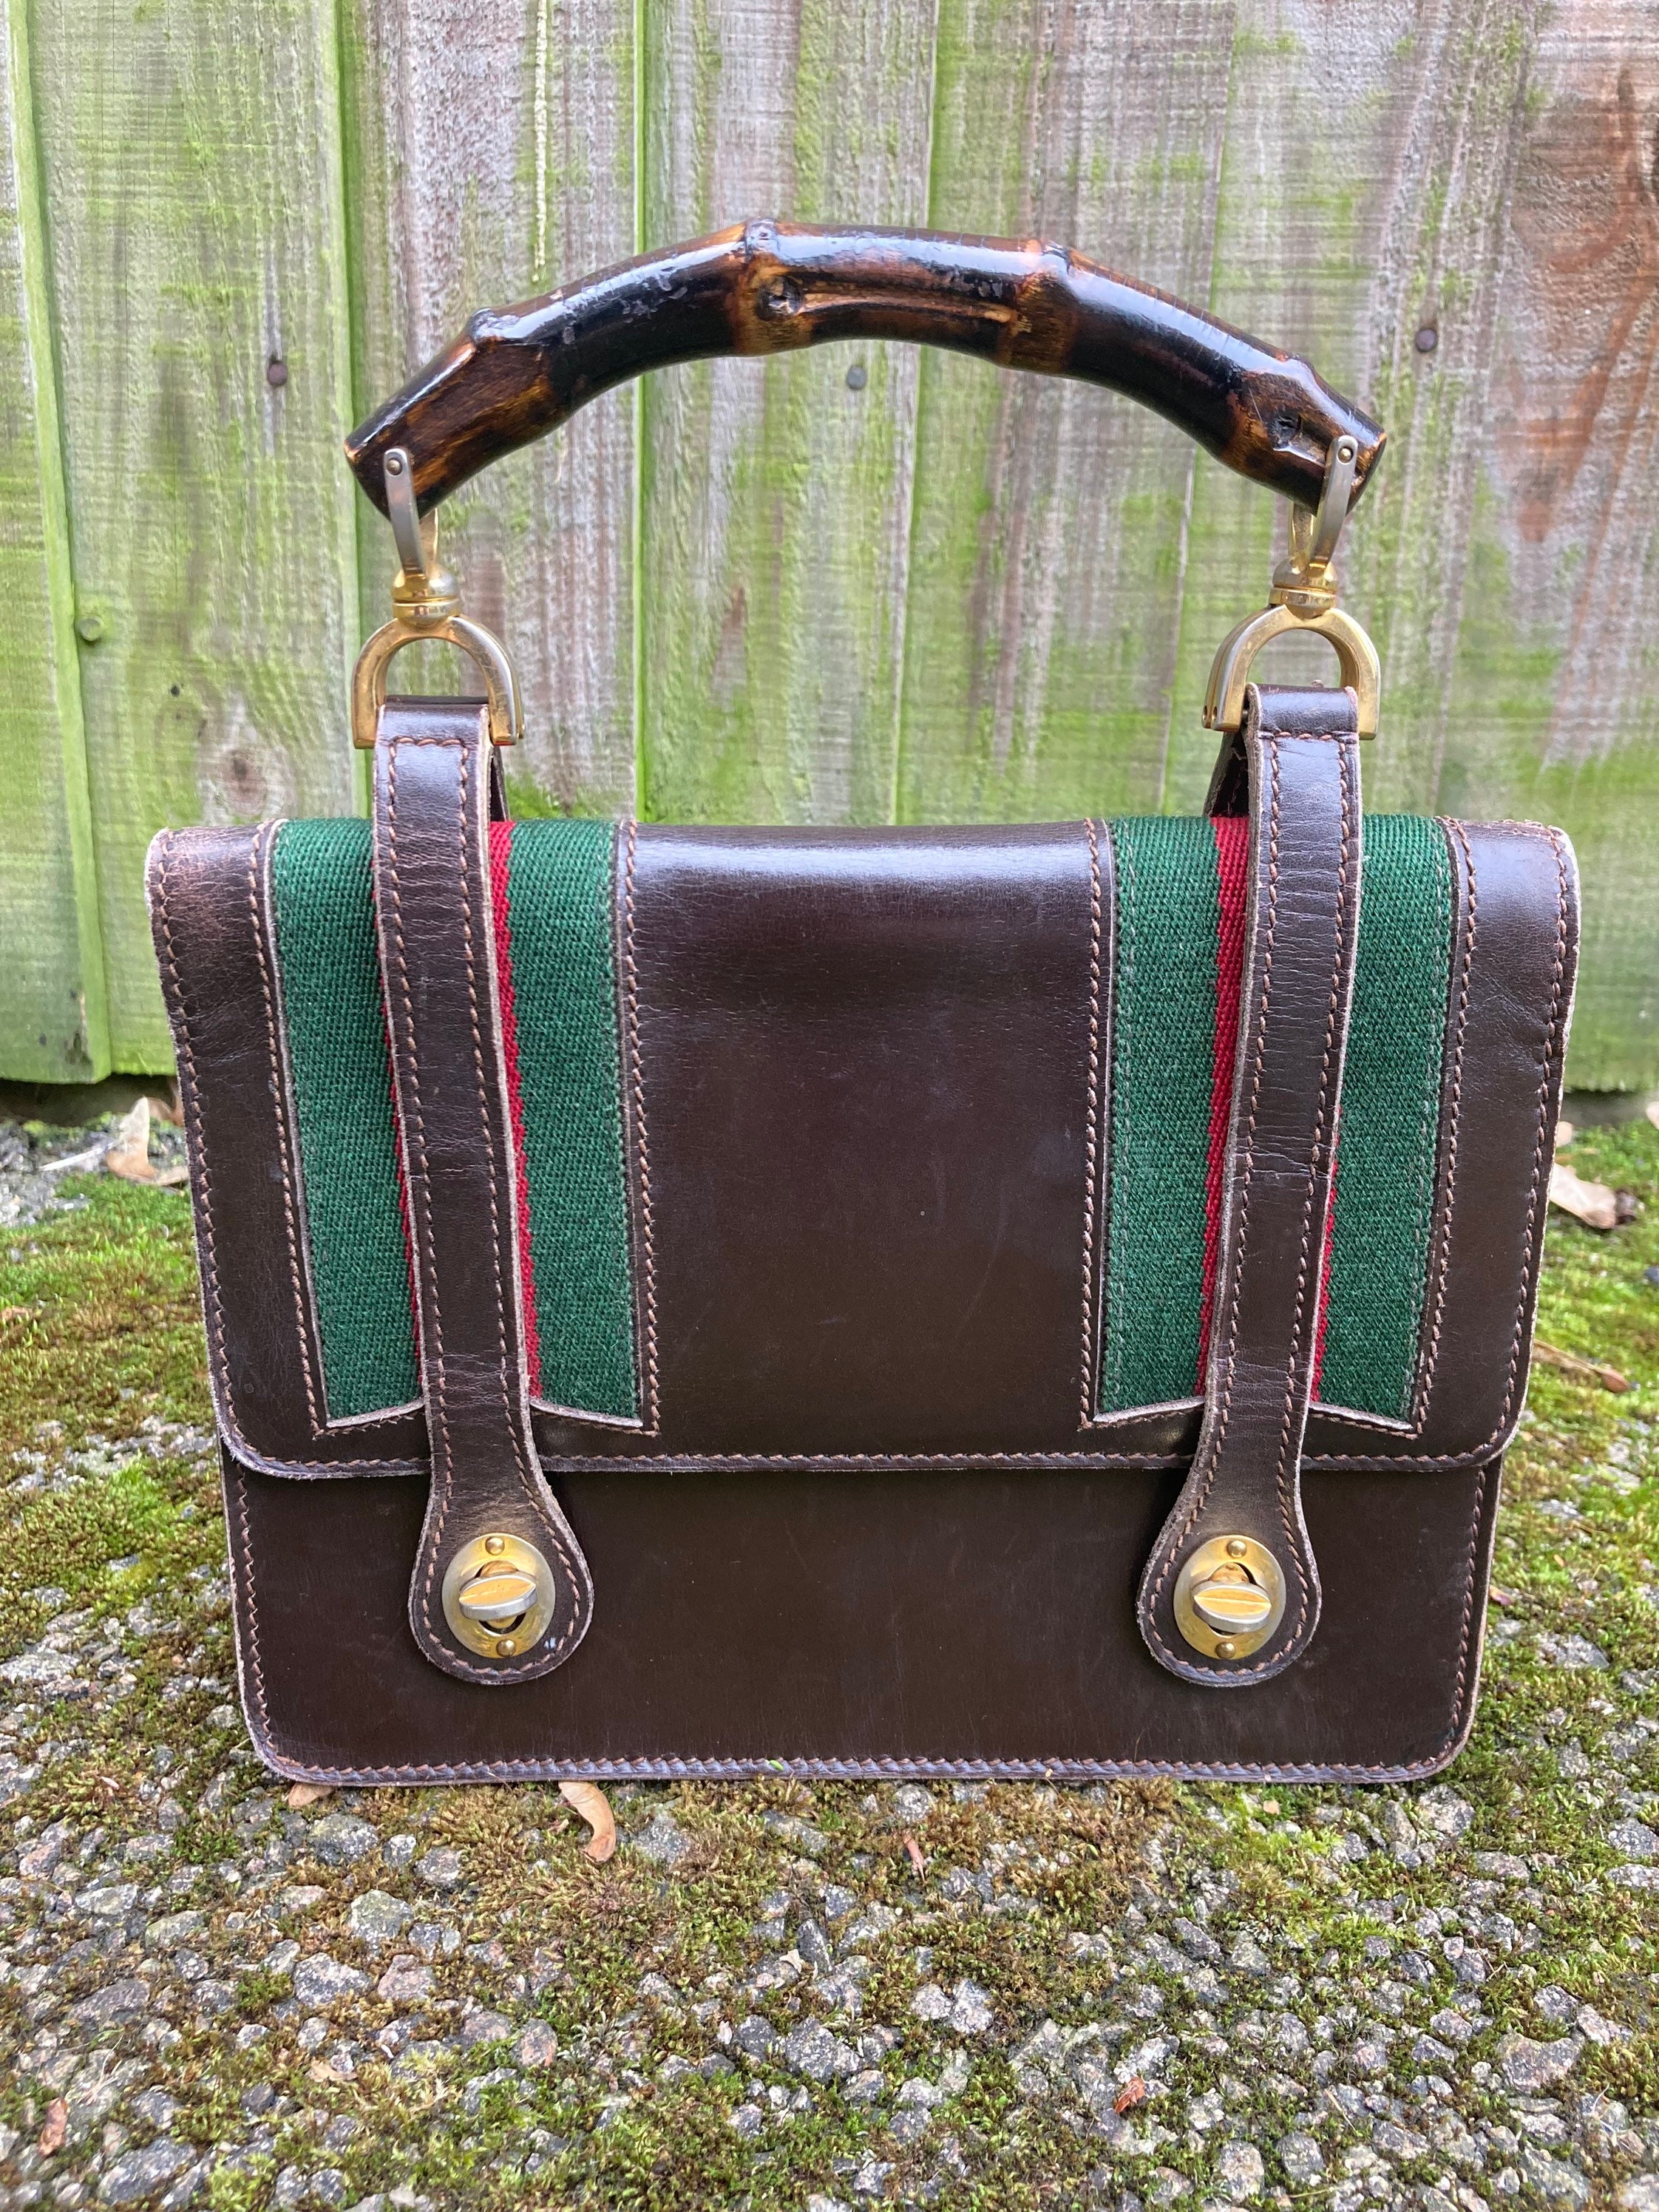 Very rare Gucci Lunchbox bag from the 1960s